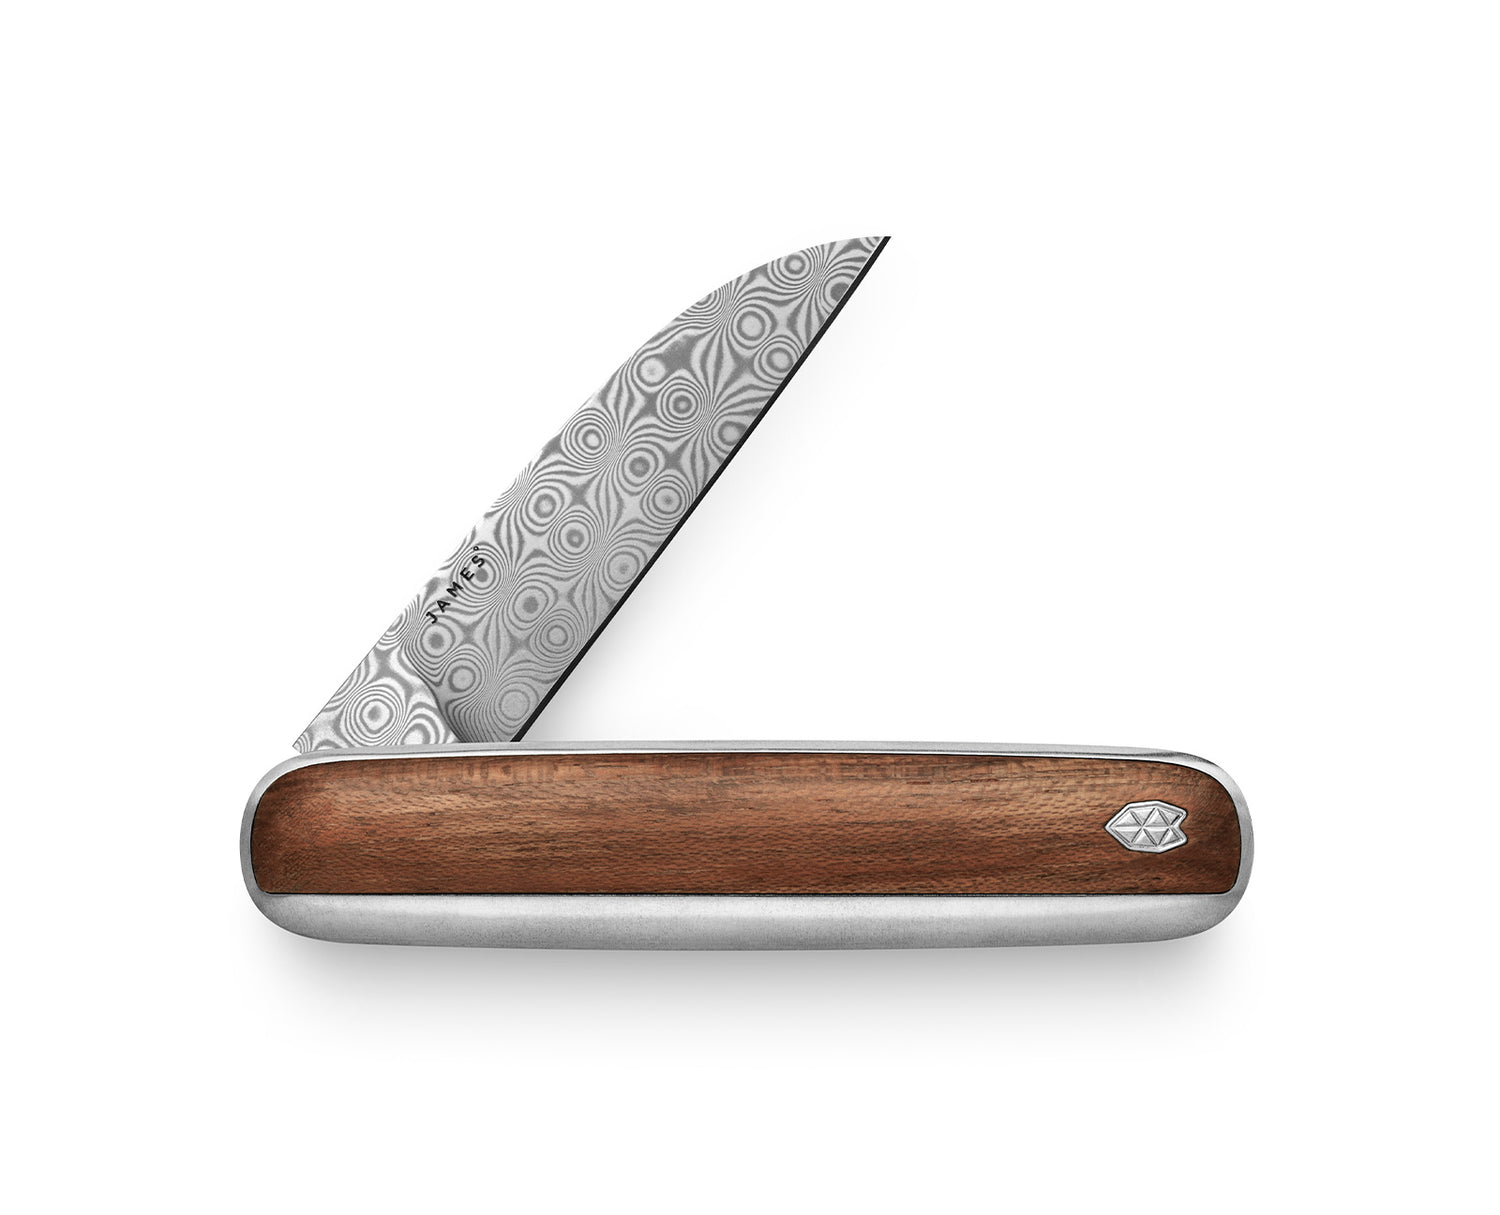 The Pike knife with rosewood handle and damasteel blade.